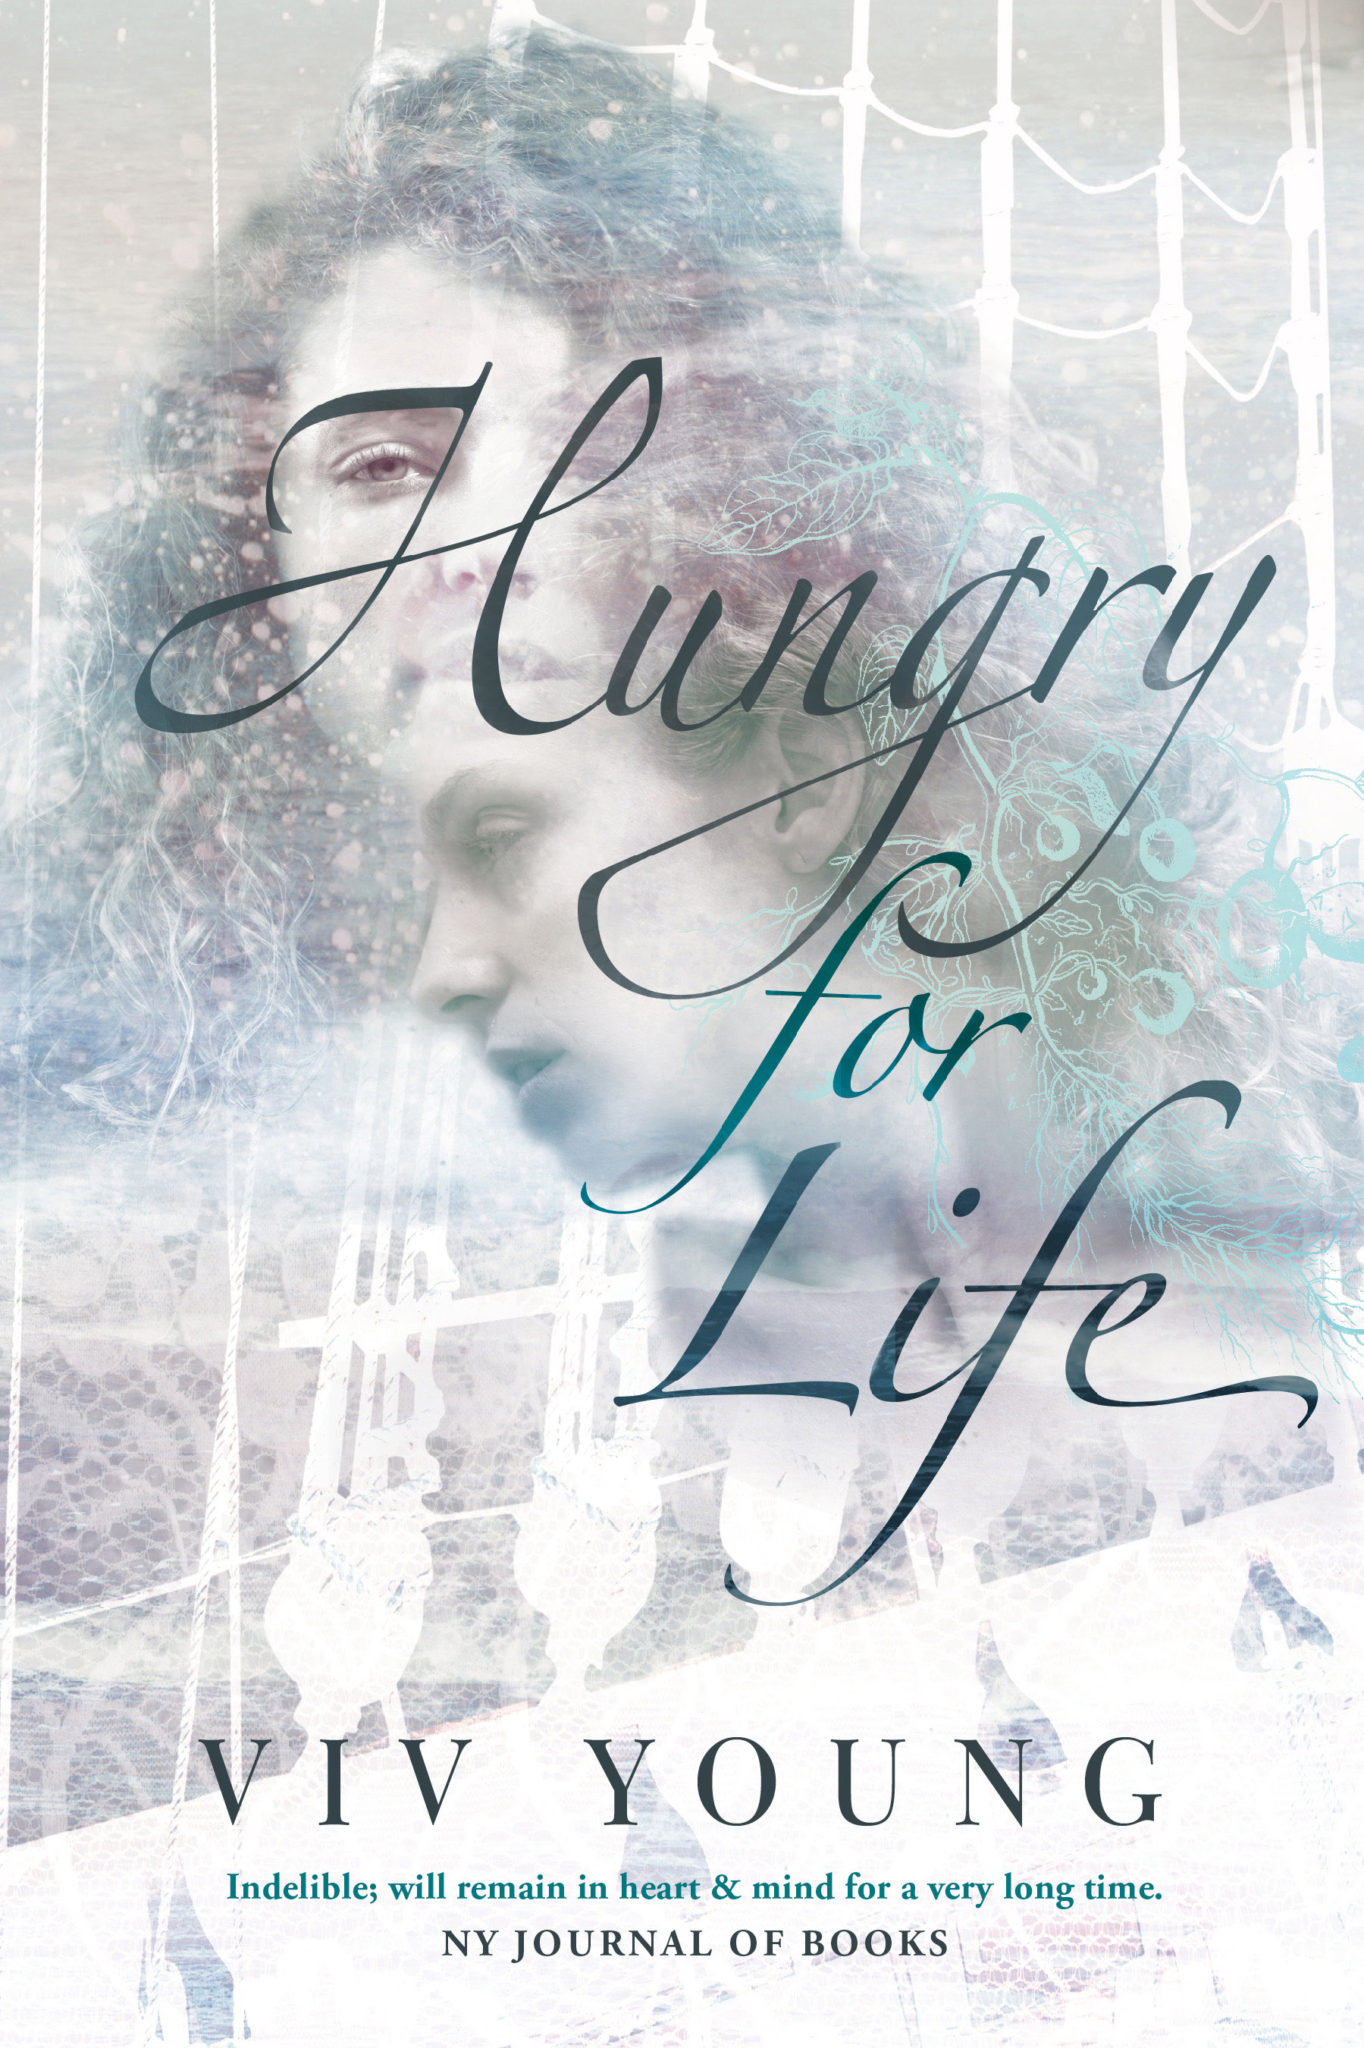 FREE: Hungry for Life by VIV YOUNG